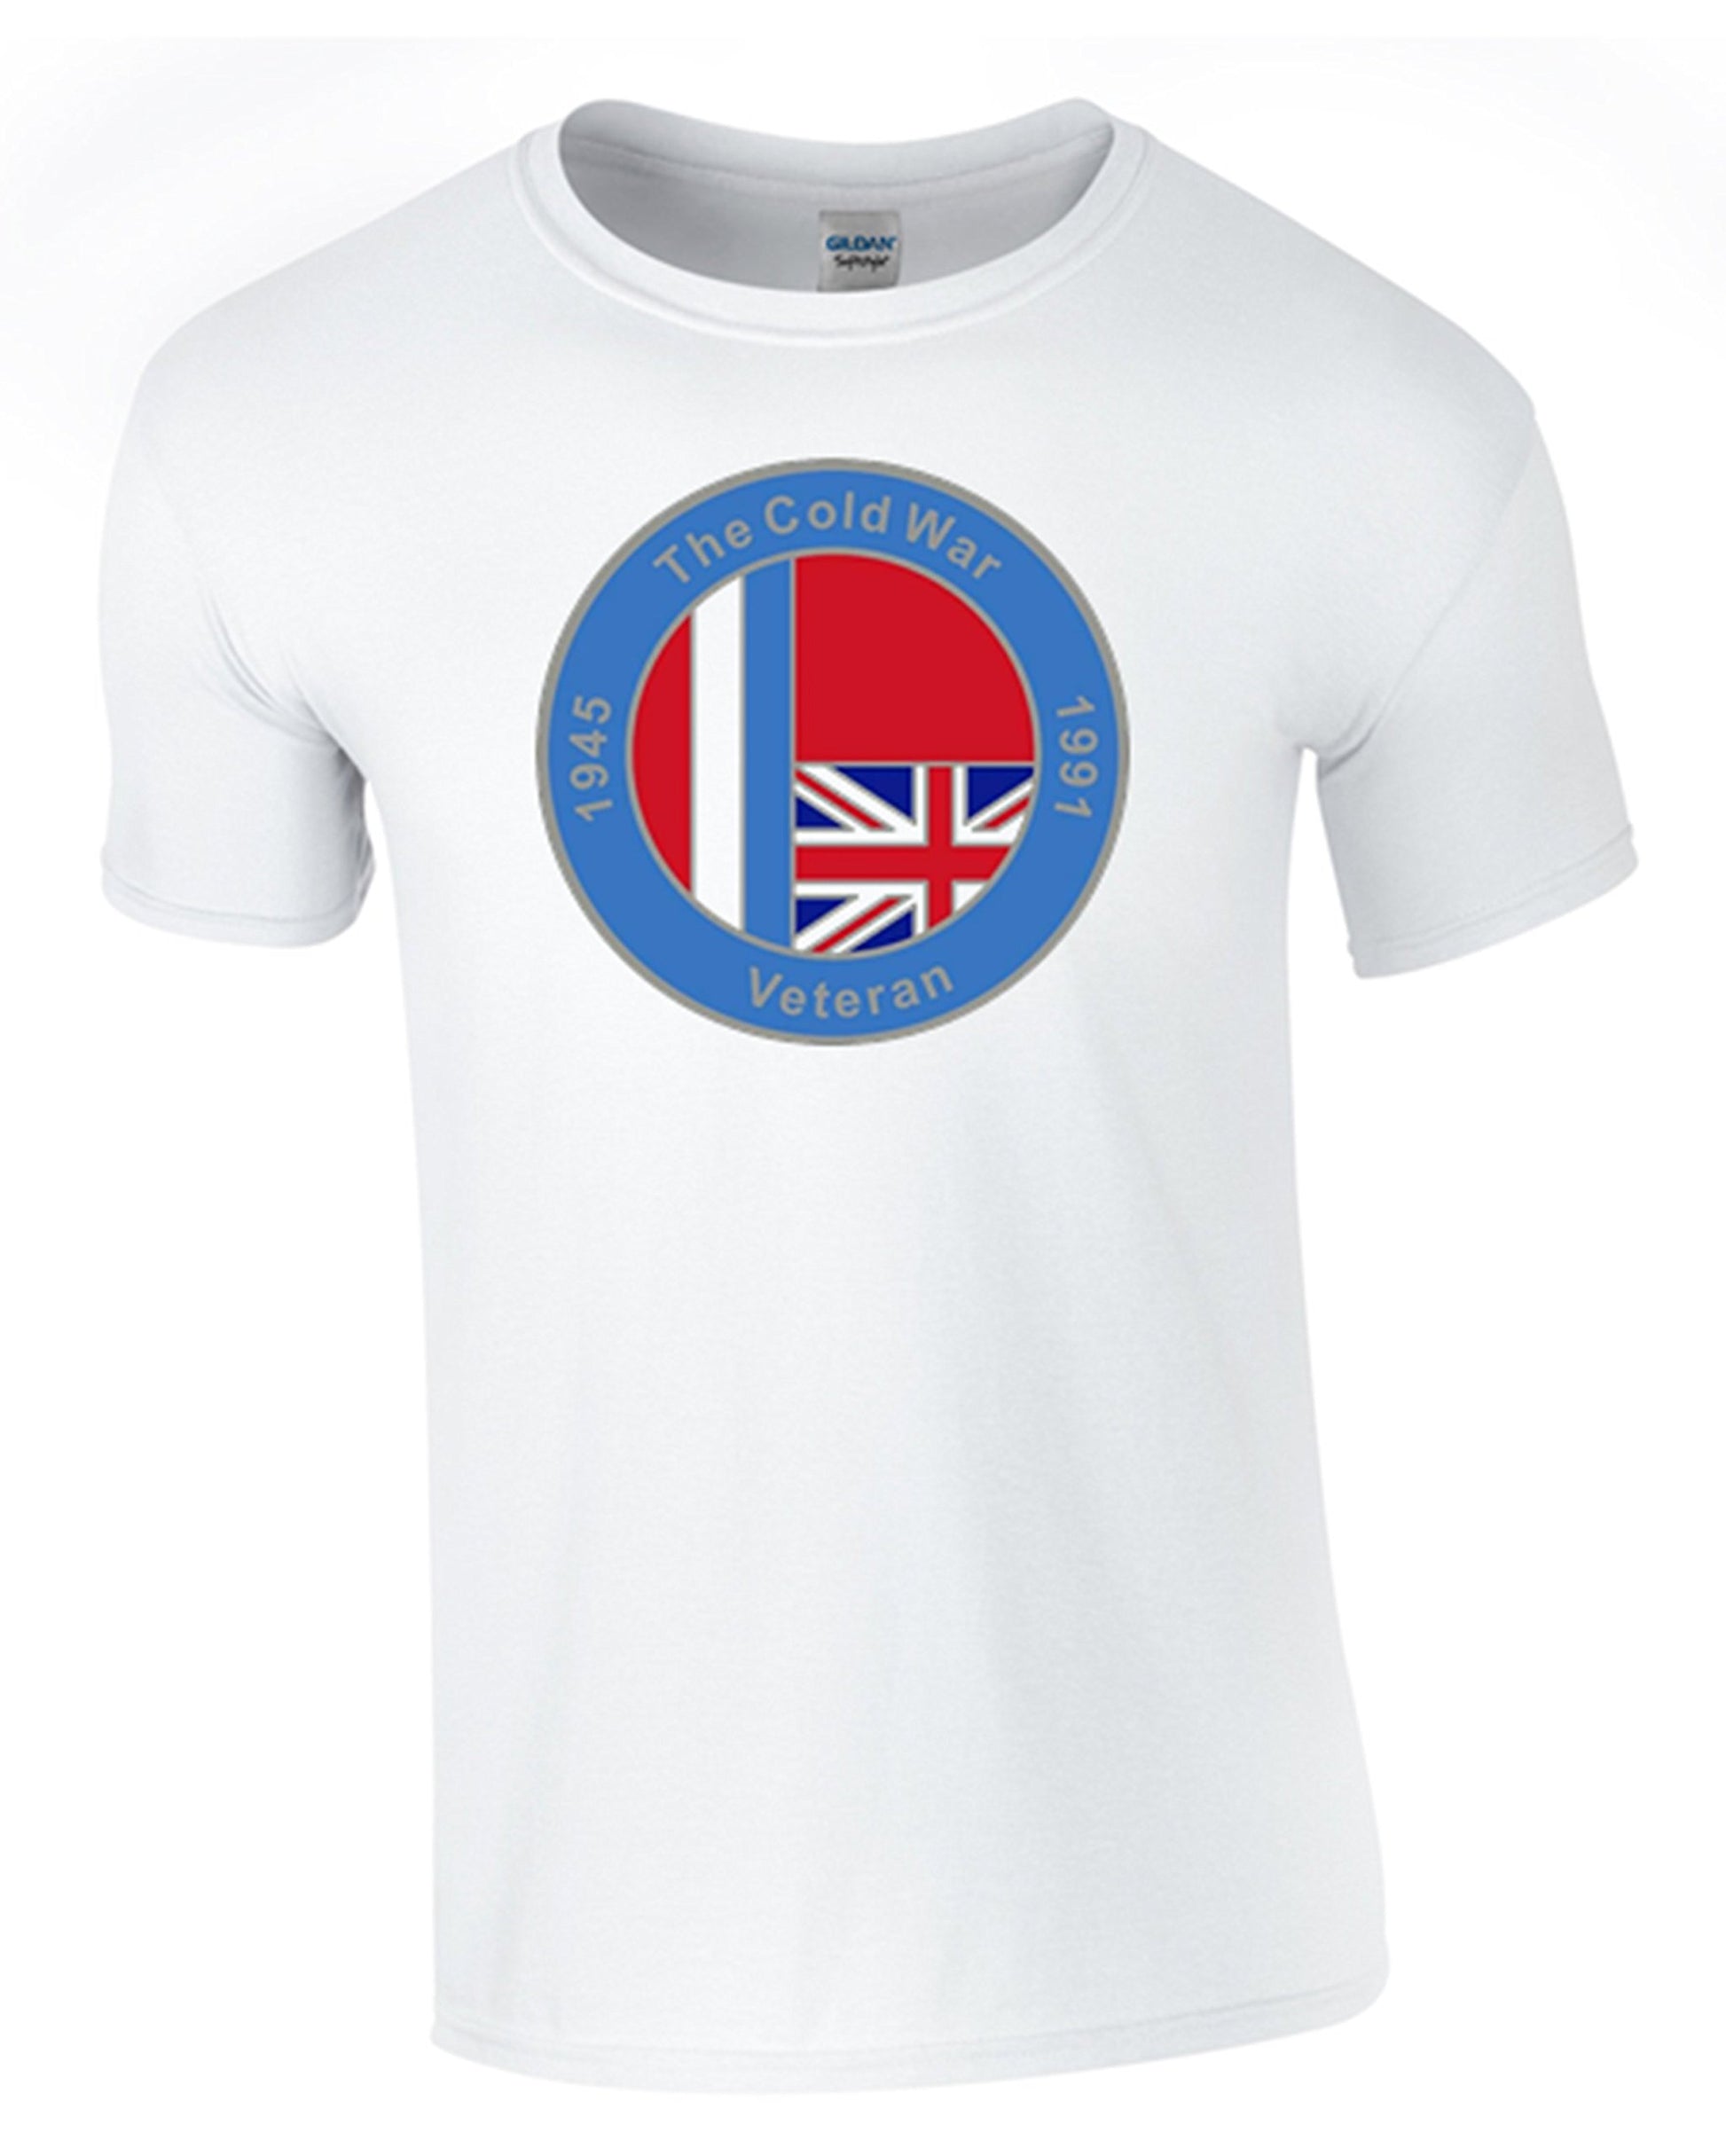 Bear Essentials Clothing. Cold War Op Banner T/Shirt (M, White) - Army 1157 kit Army 1157 Kit